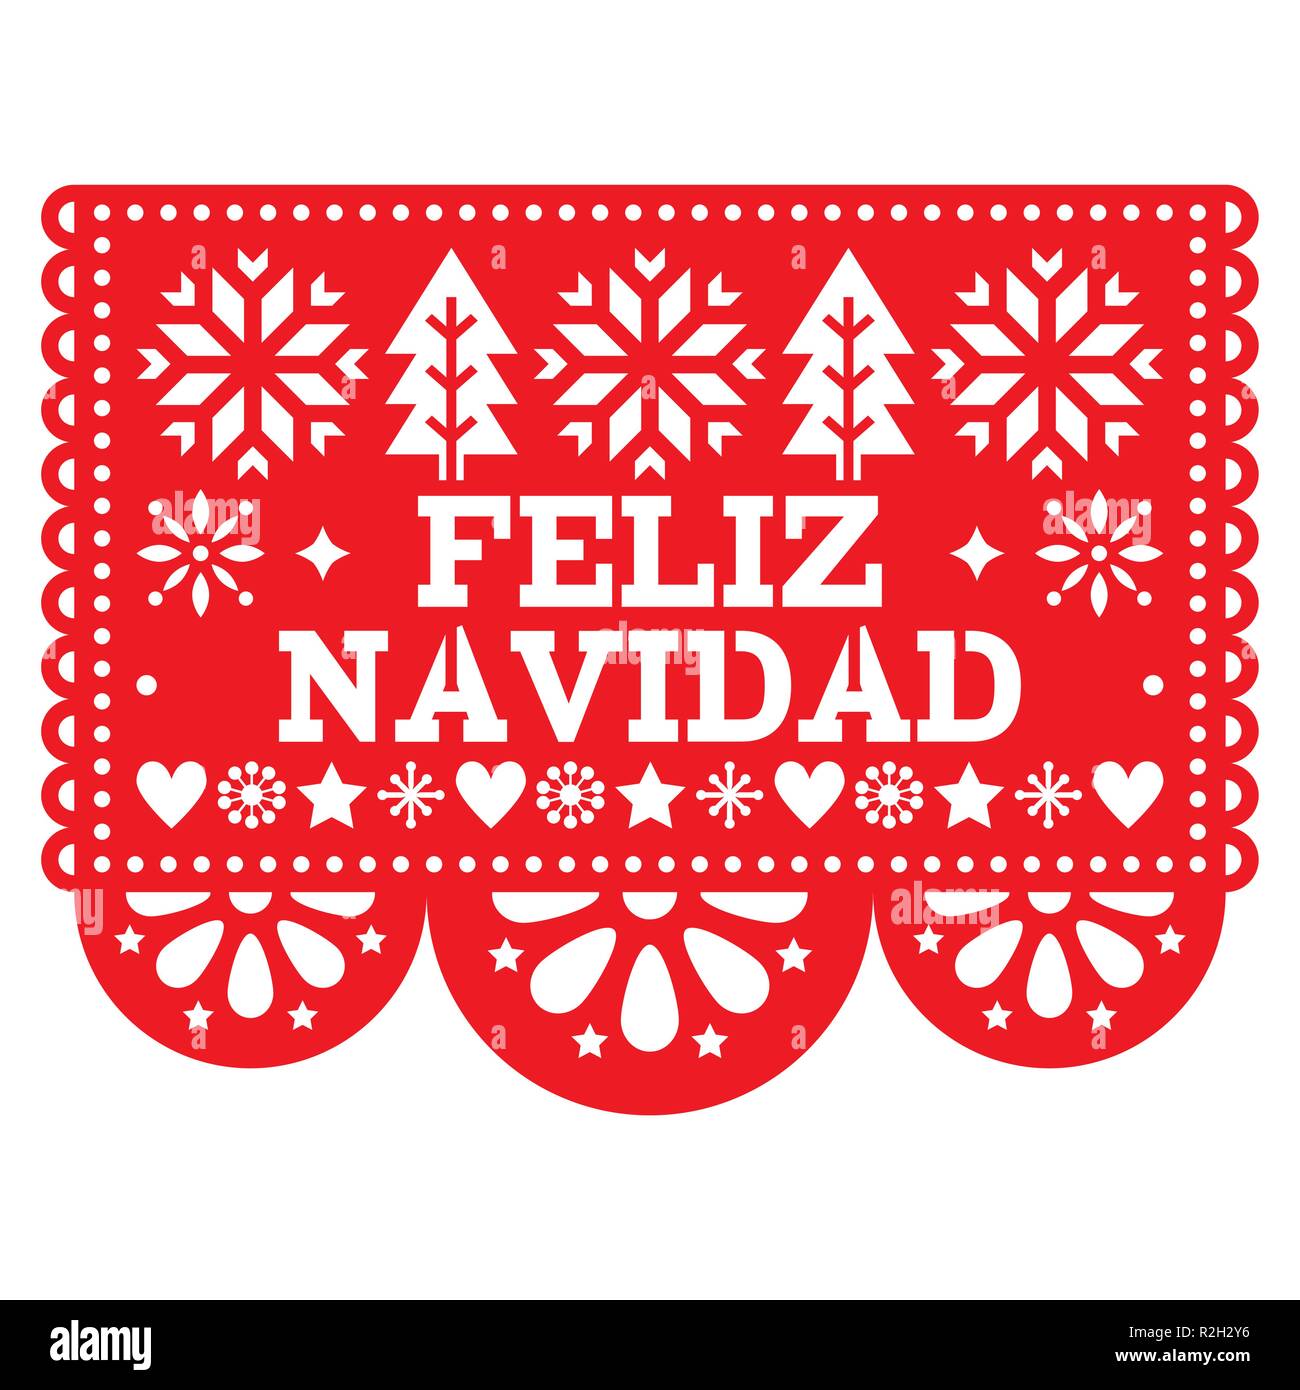 Feliz Navidad Papel Picado vector design, Mexican Xmas greeting card, red and white paper garland decoration pattern  Festive red party banner inspire Stock Vector